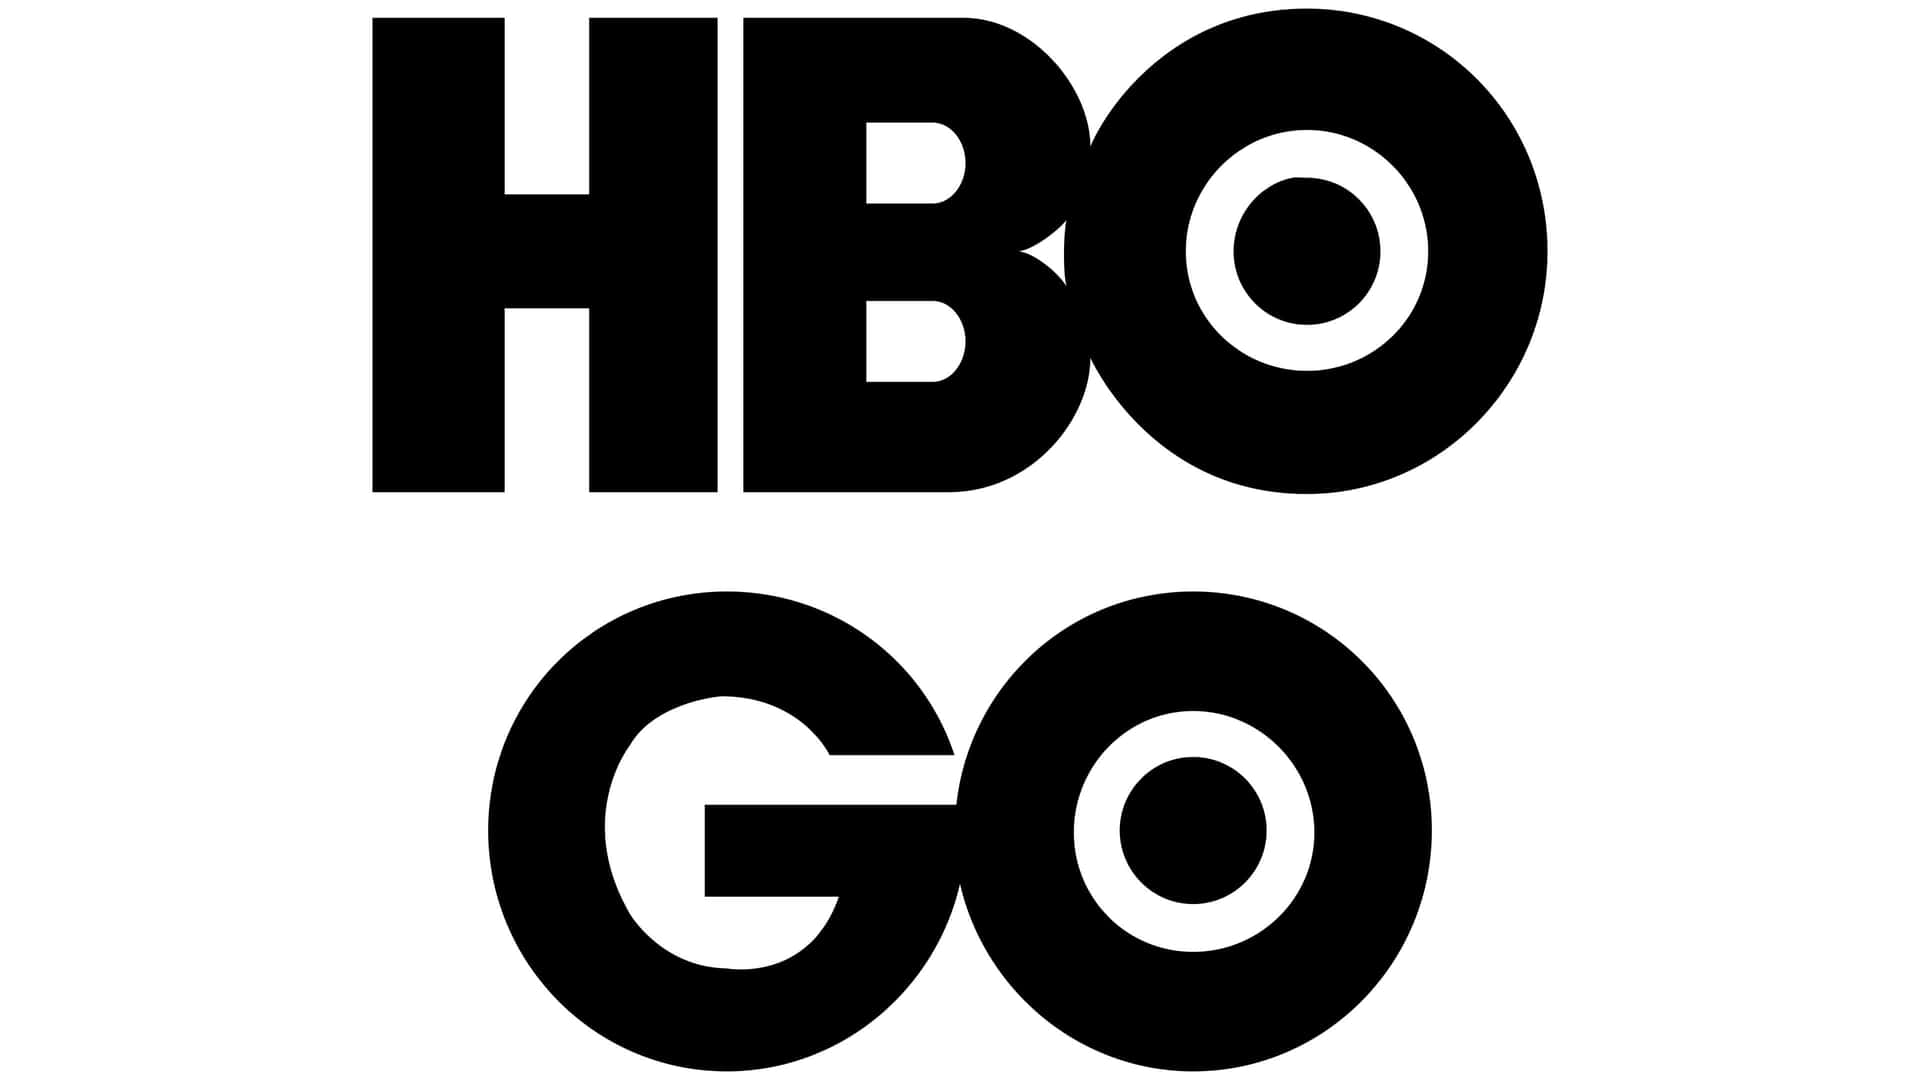 Get Access to Premium Entertainment with HBO